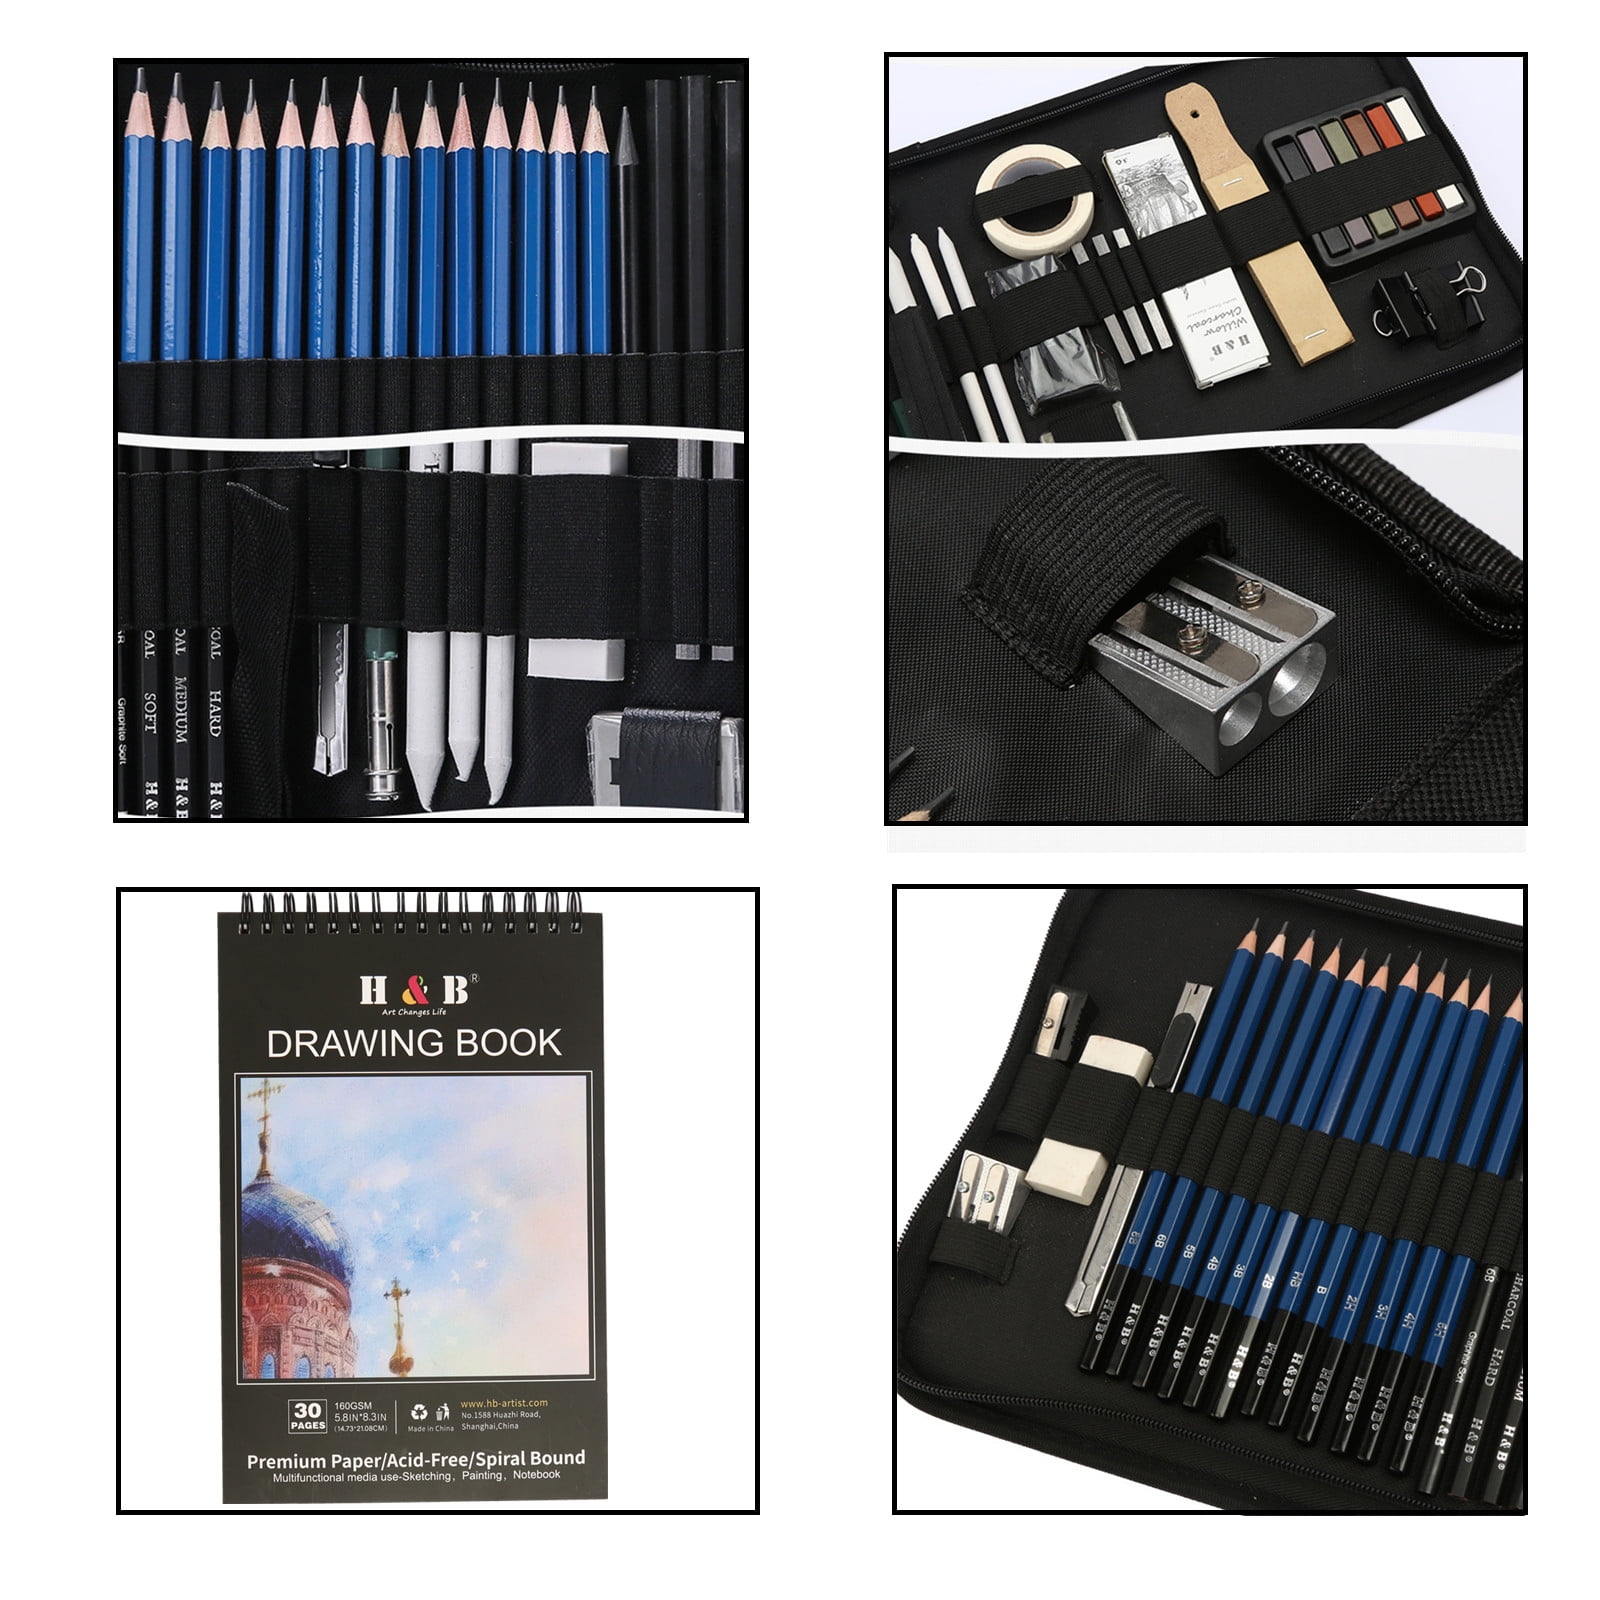 LUCYCAZ Drawing Pencil Kit Sketchbook with Charcoal Pencils and Sketch Pads Set Art Supplies with Drawing Pad in Carrying Case Travel Sketch Kit